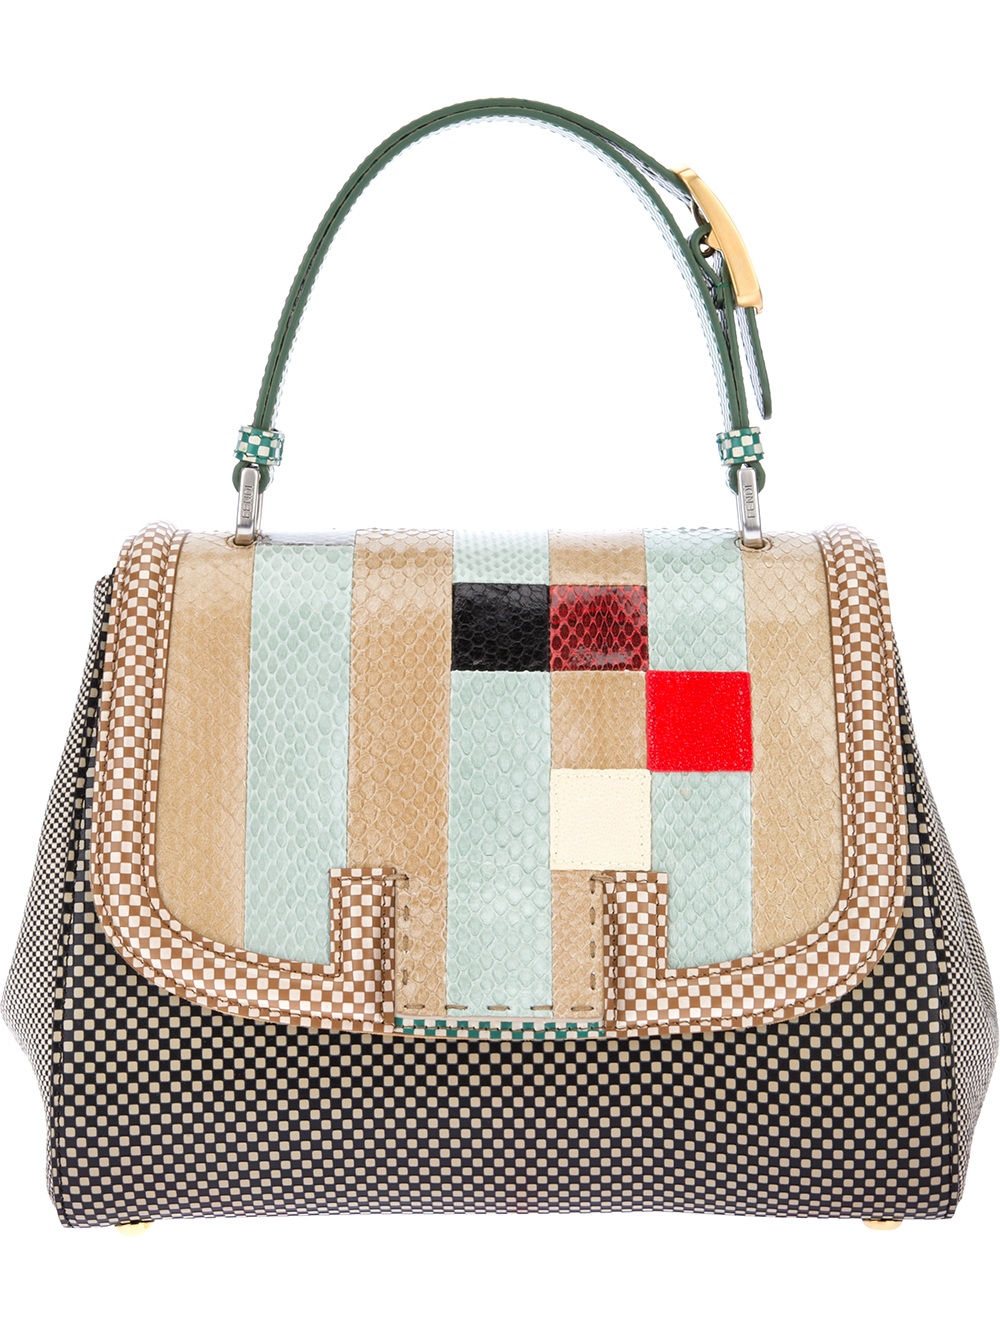 Fendi Silvana Leather Bag With Stingray Detail in Multicolor ...